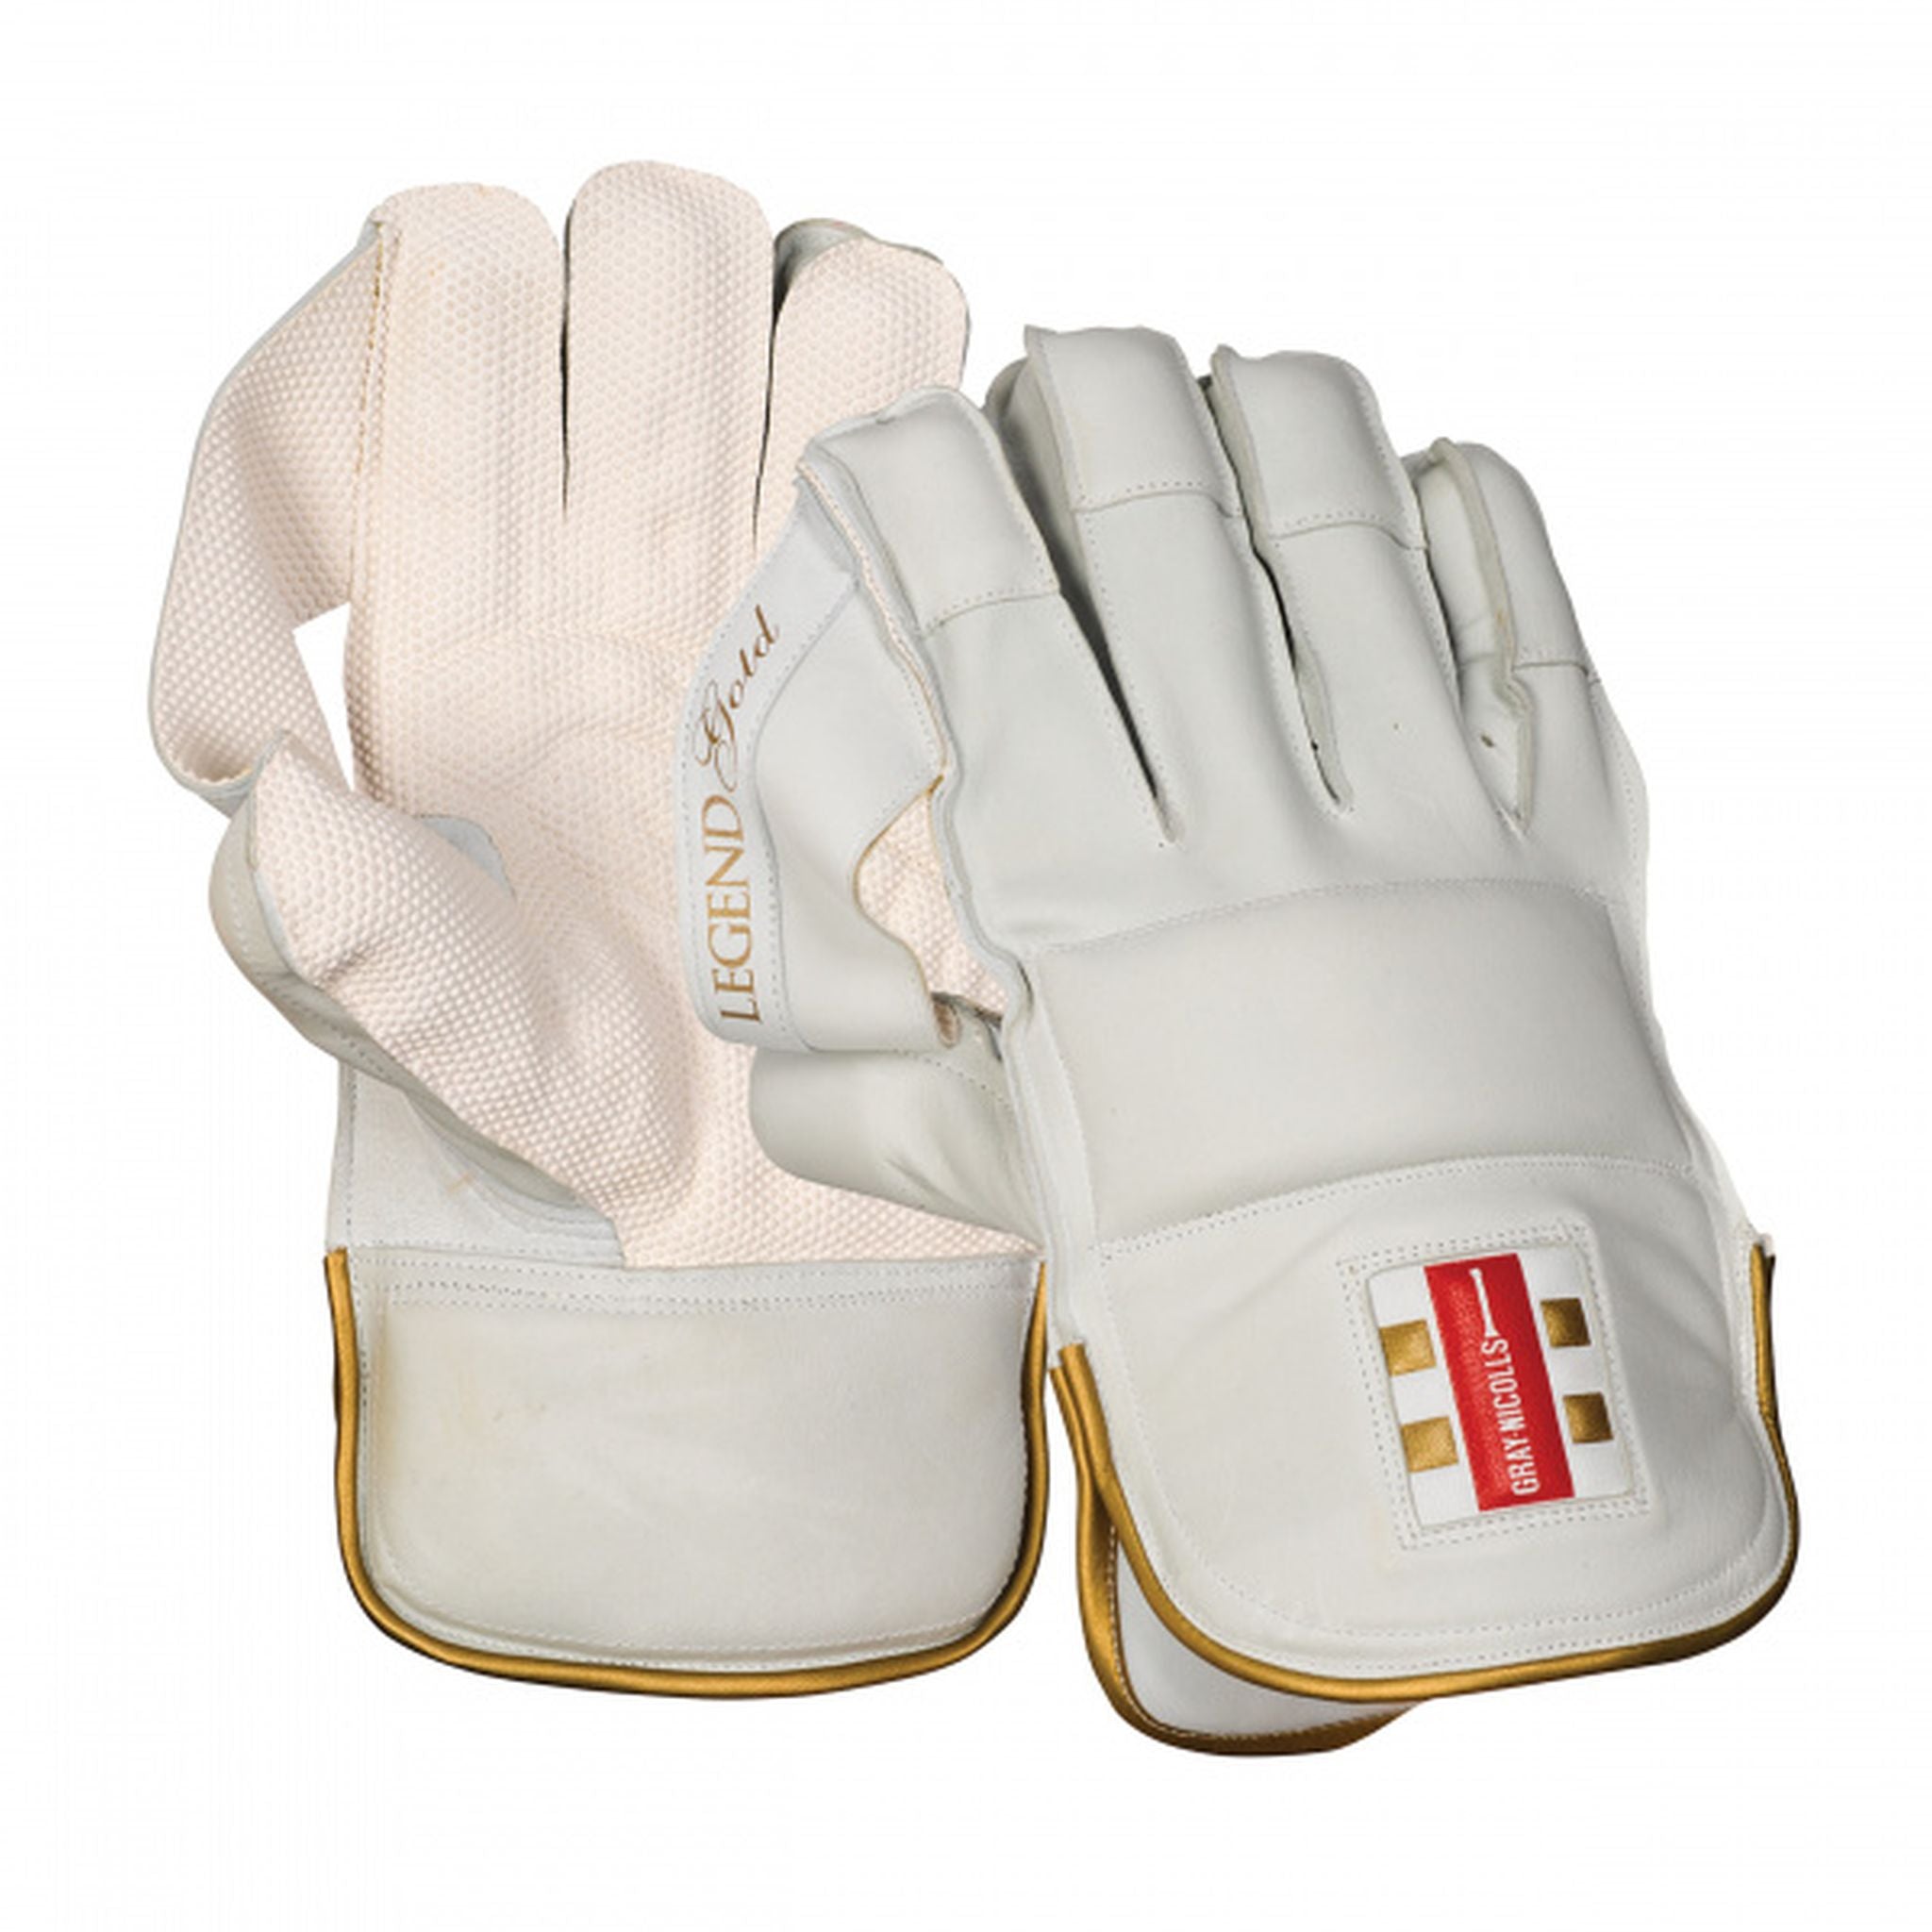 Gray-Nicolls Legend Gold Adults Wicket Keeping Gloves